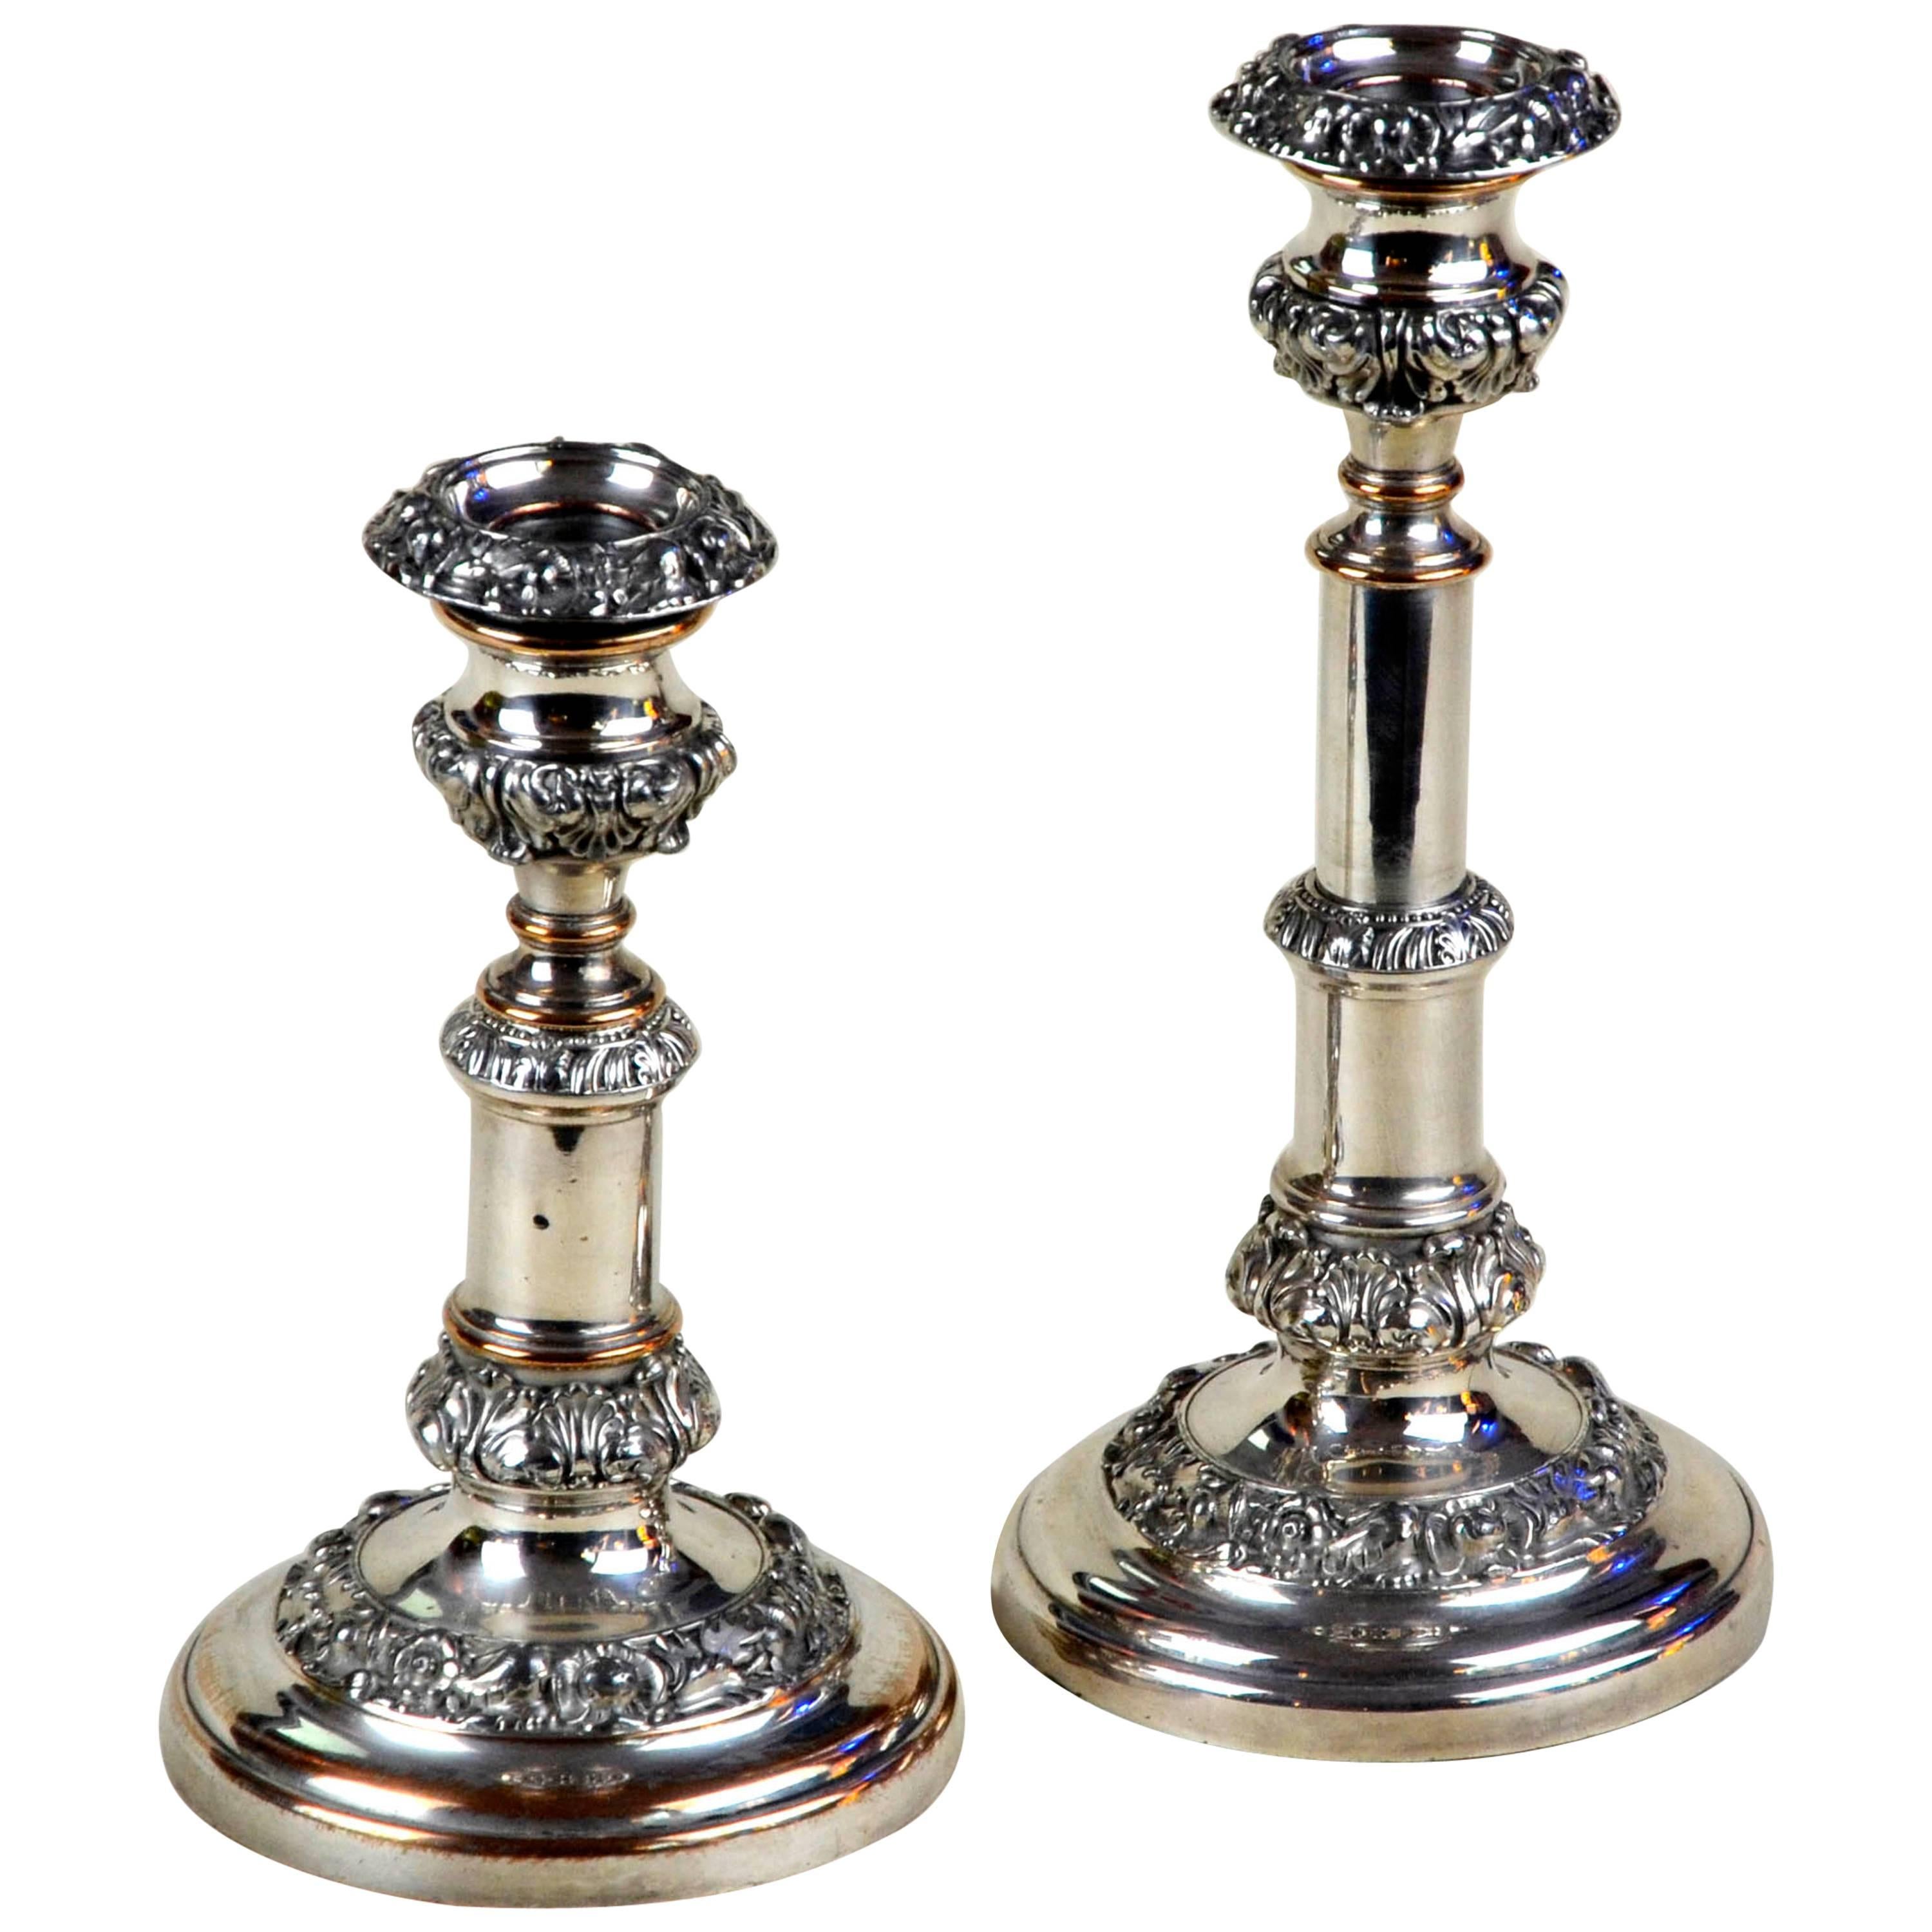 1820s Pair of English Georgian Old Sheffield Plate Telescopic Candlesticks For Sale